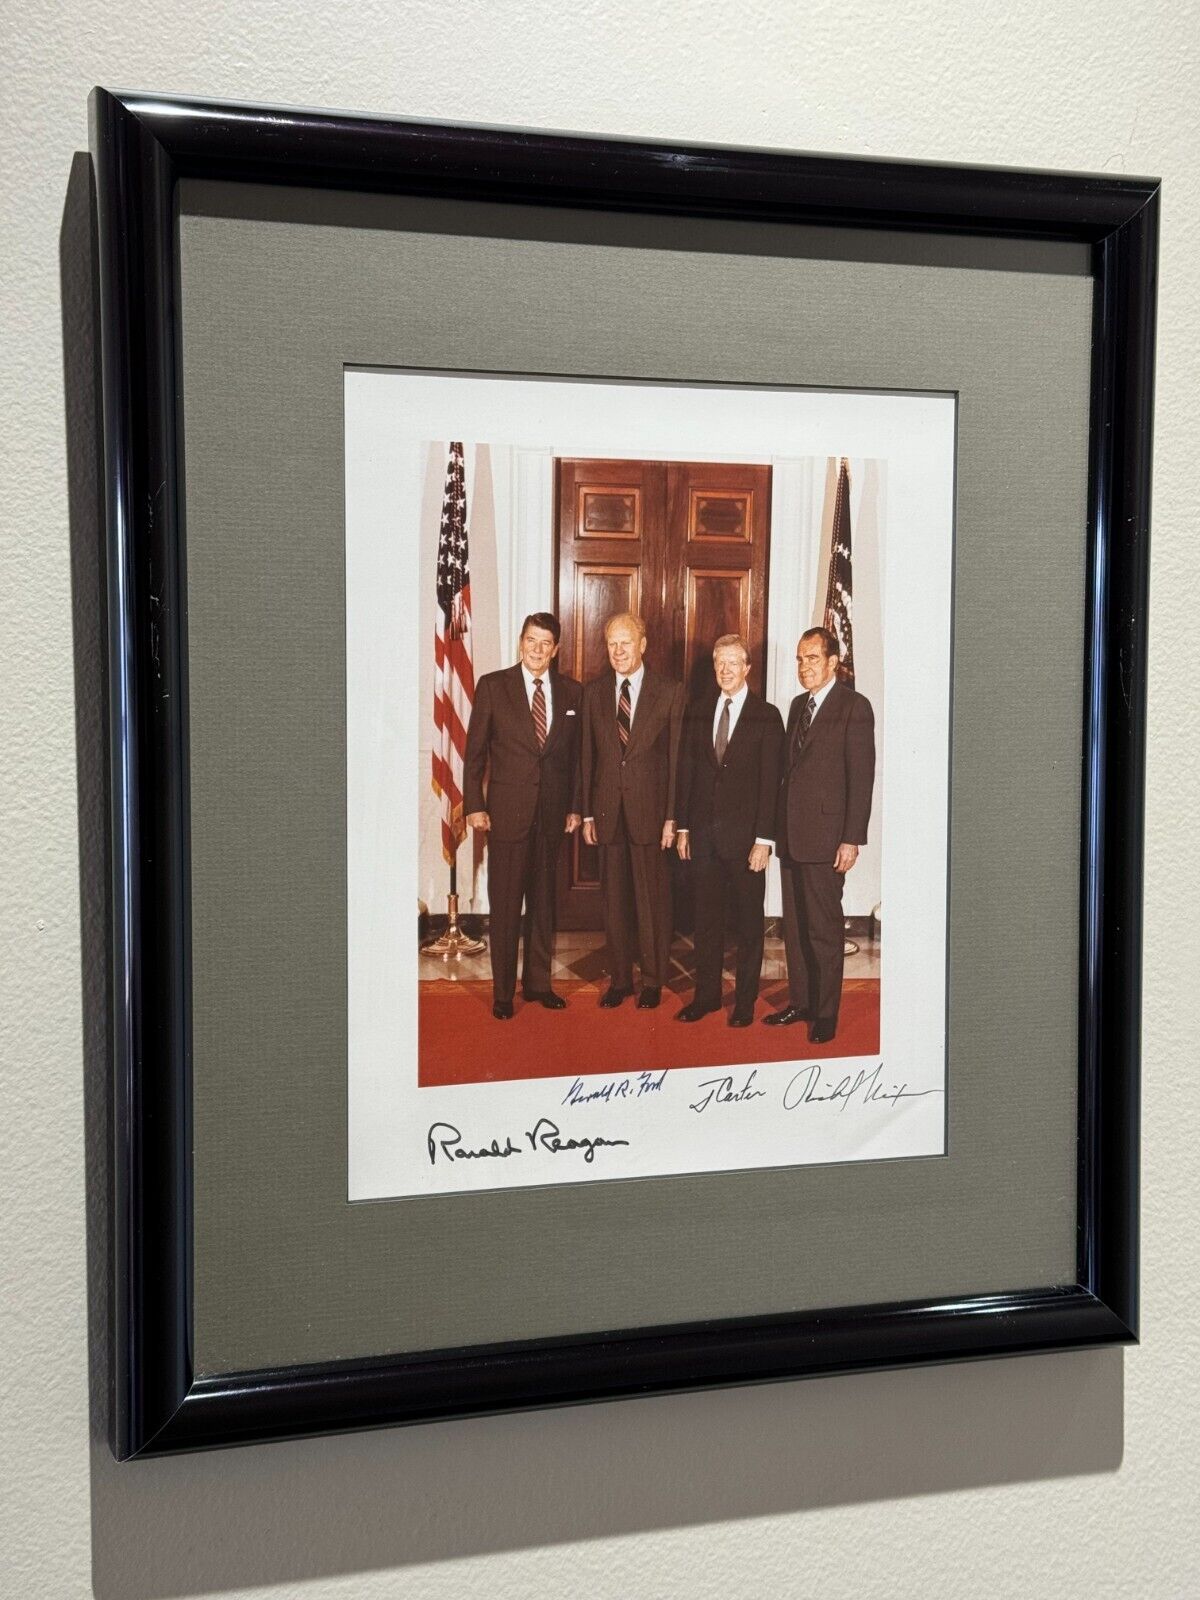 Rare photo signed by US Presidents Reagan, Ford, Carter & Nixon